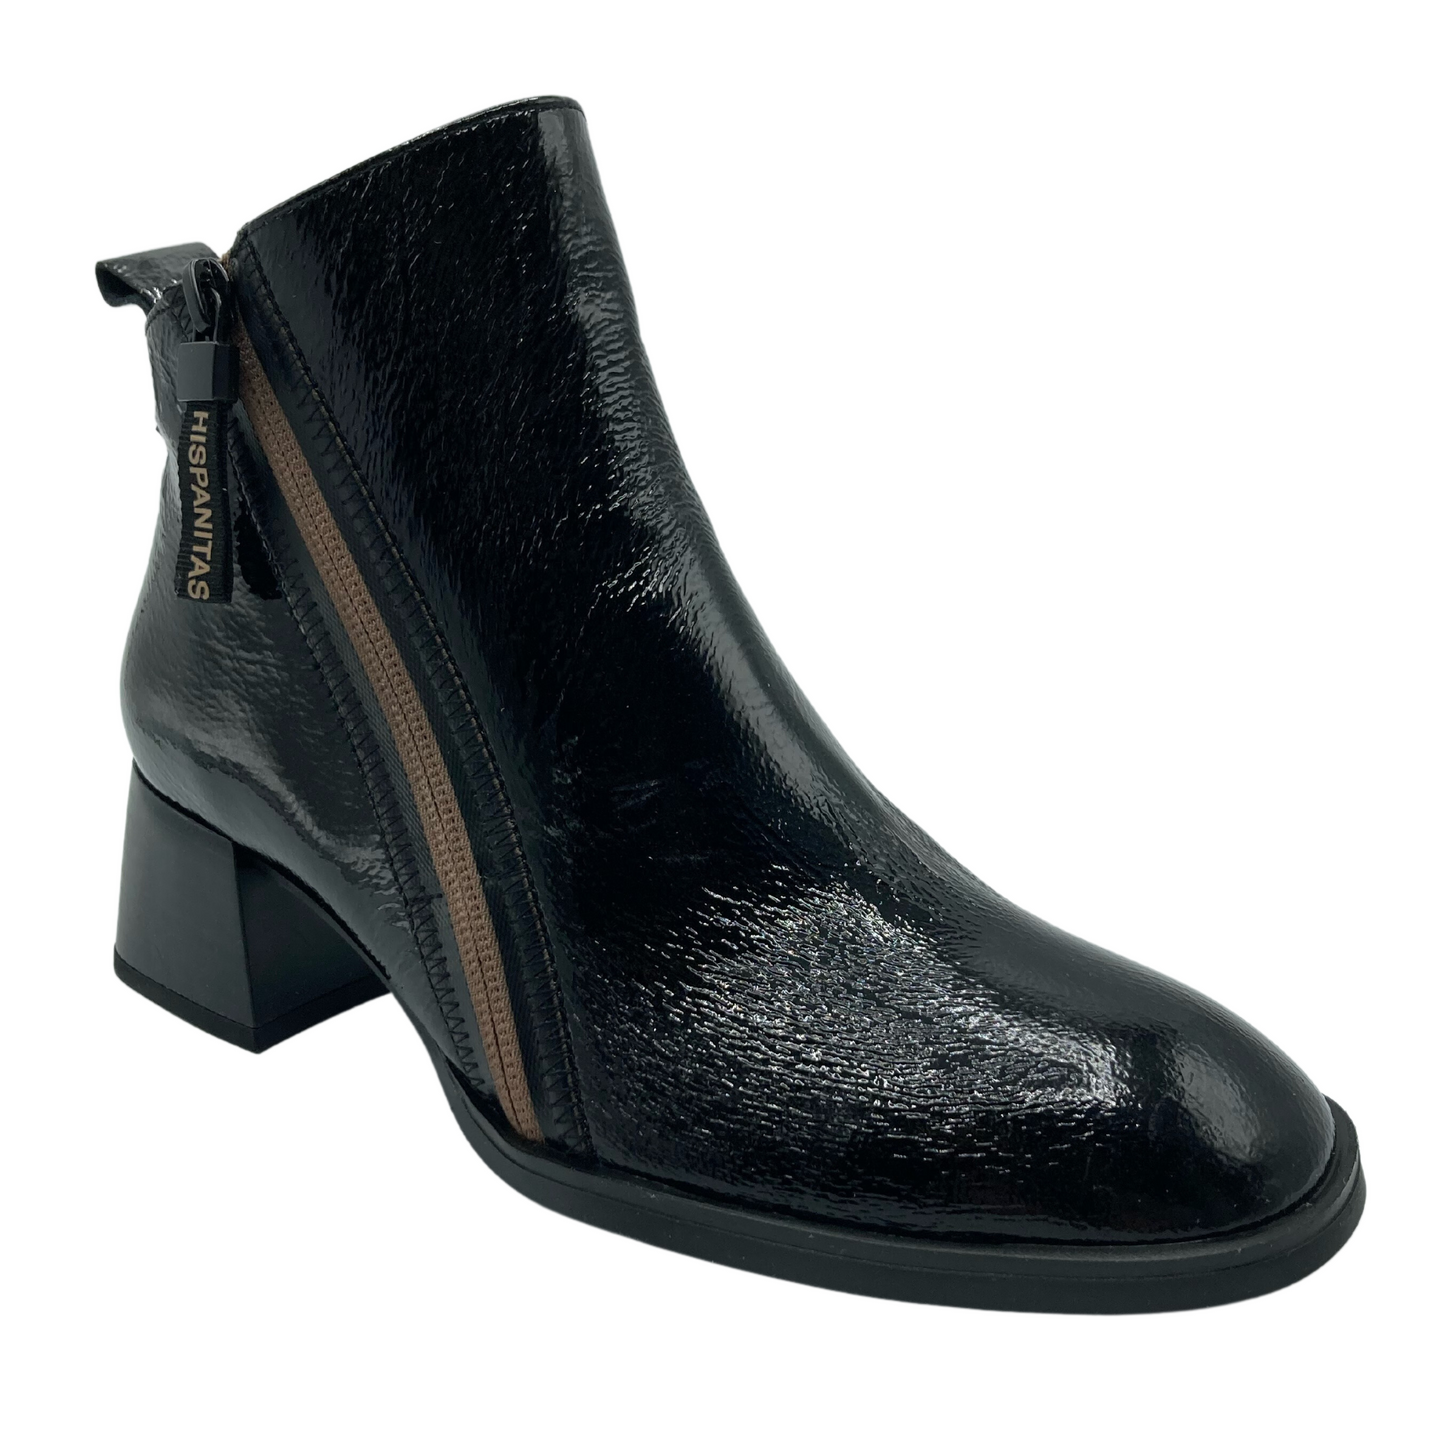 Angled view of black patent leather boot with rounded toe and logo zipper pull